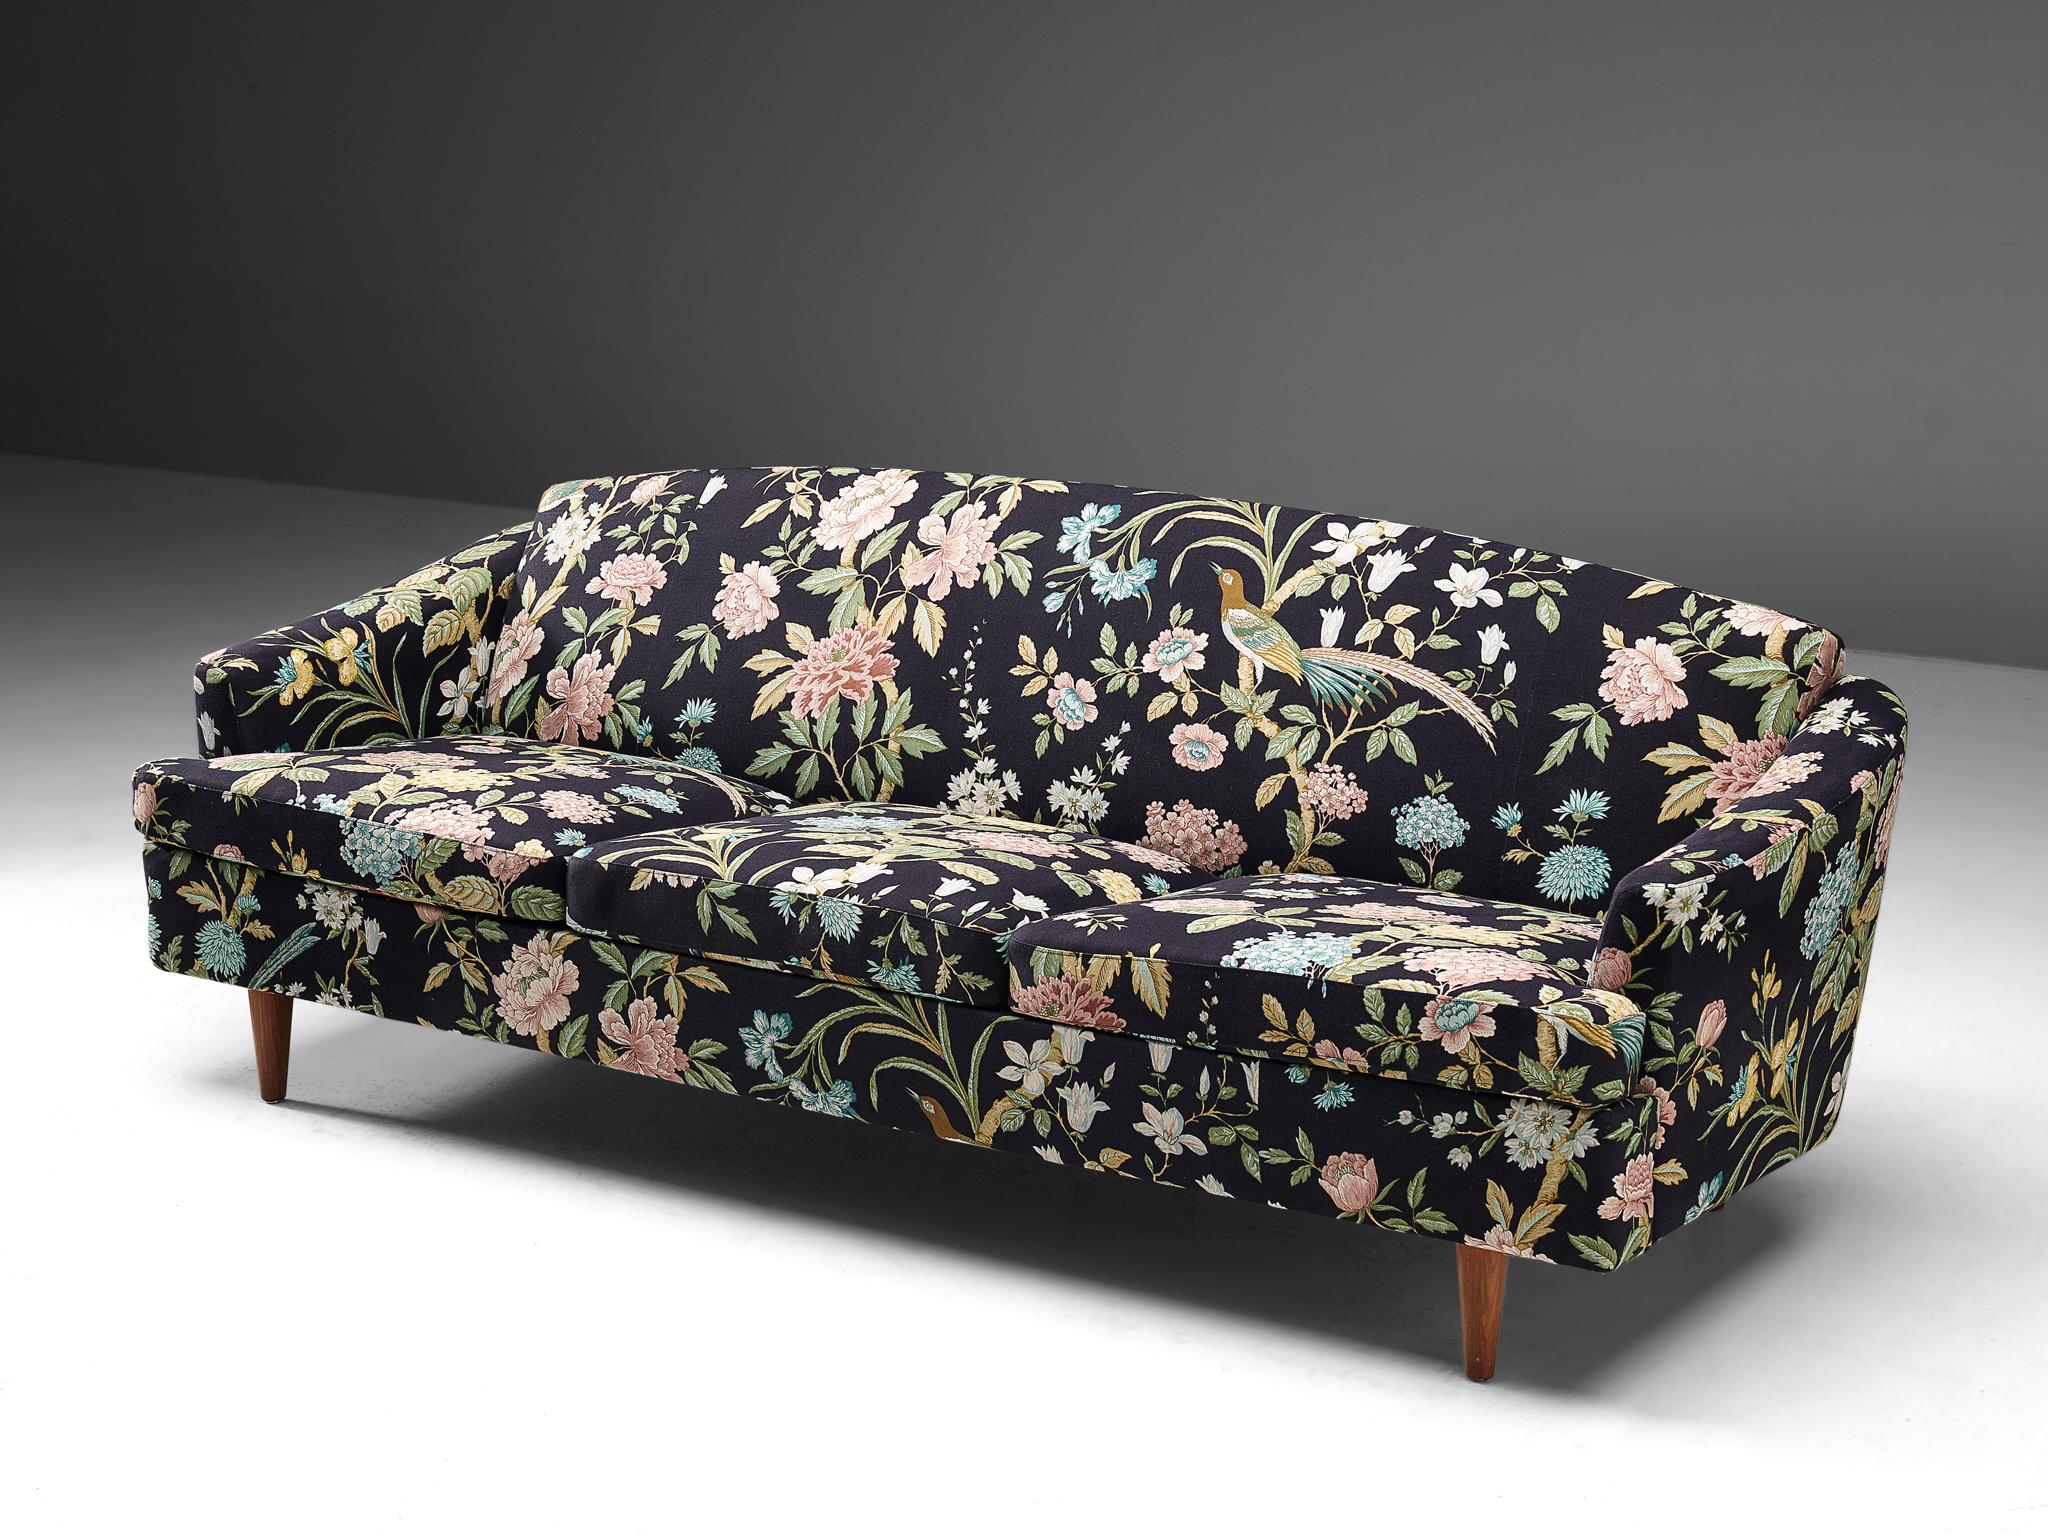 Three seat sofa, floral upholstery, teak, Denmark, 1960s

Three-seat sofa with rounded backrest. This sofa is upholstered in a vibrant floral upholstery with a black background color. The fabric displays different flowers and birds across the